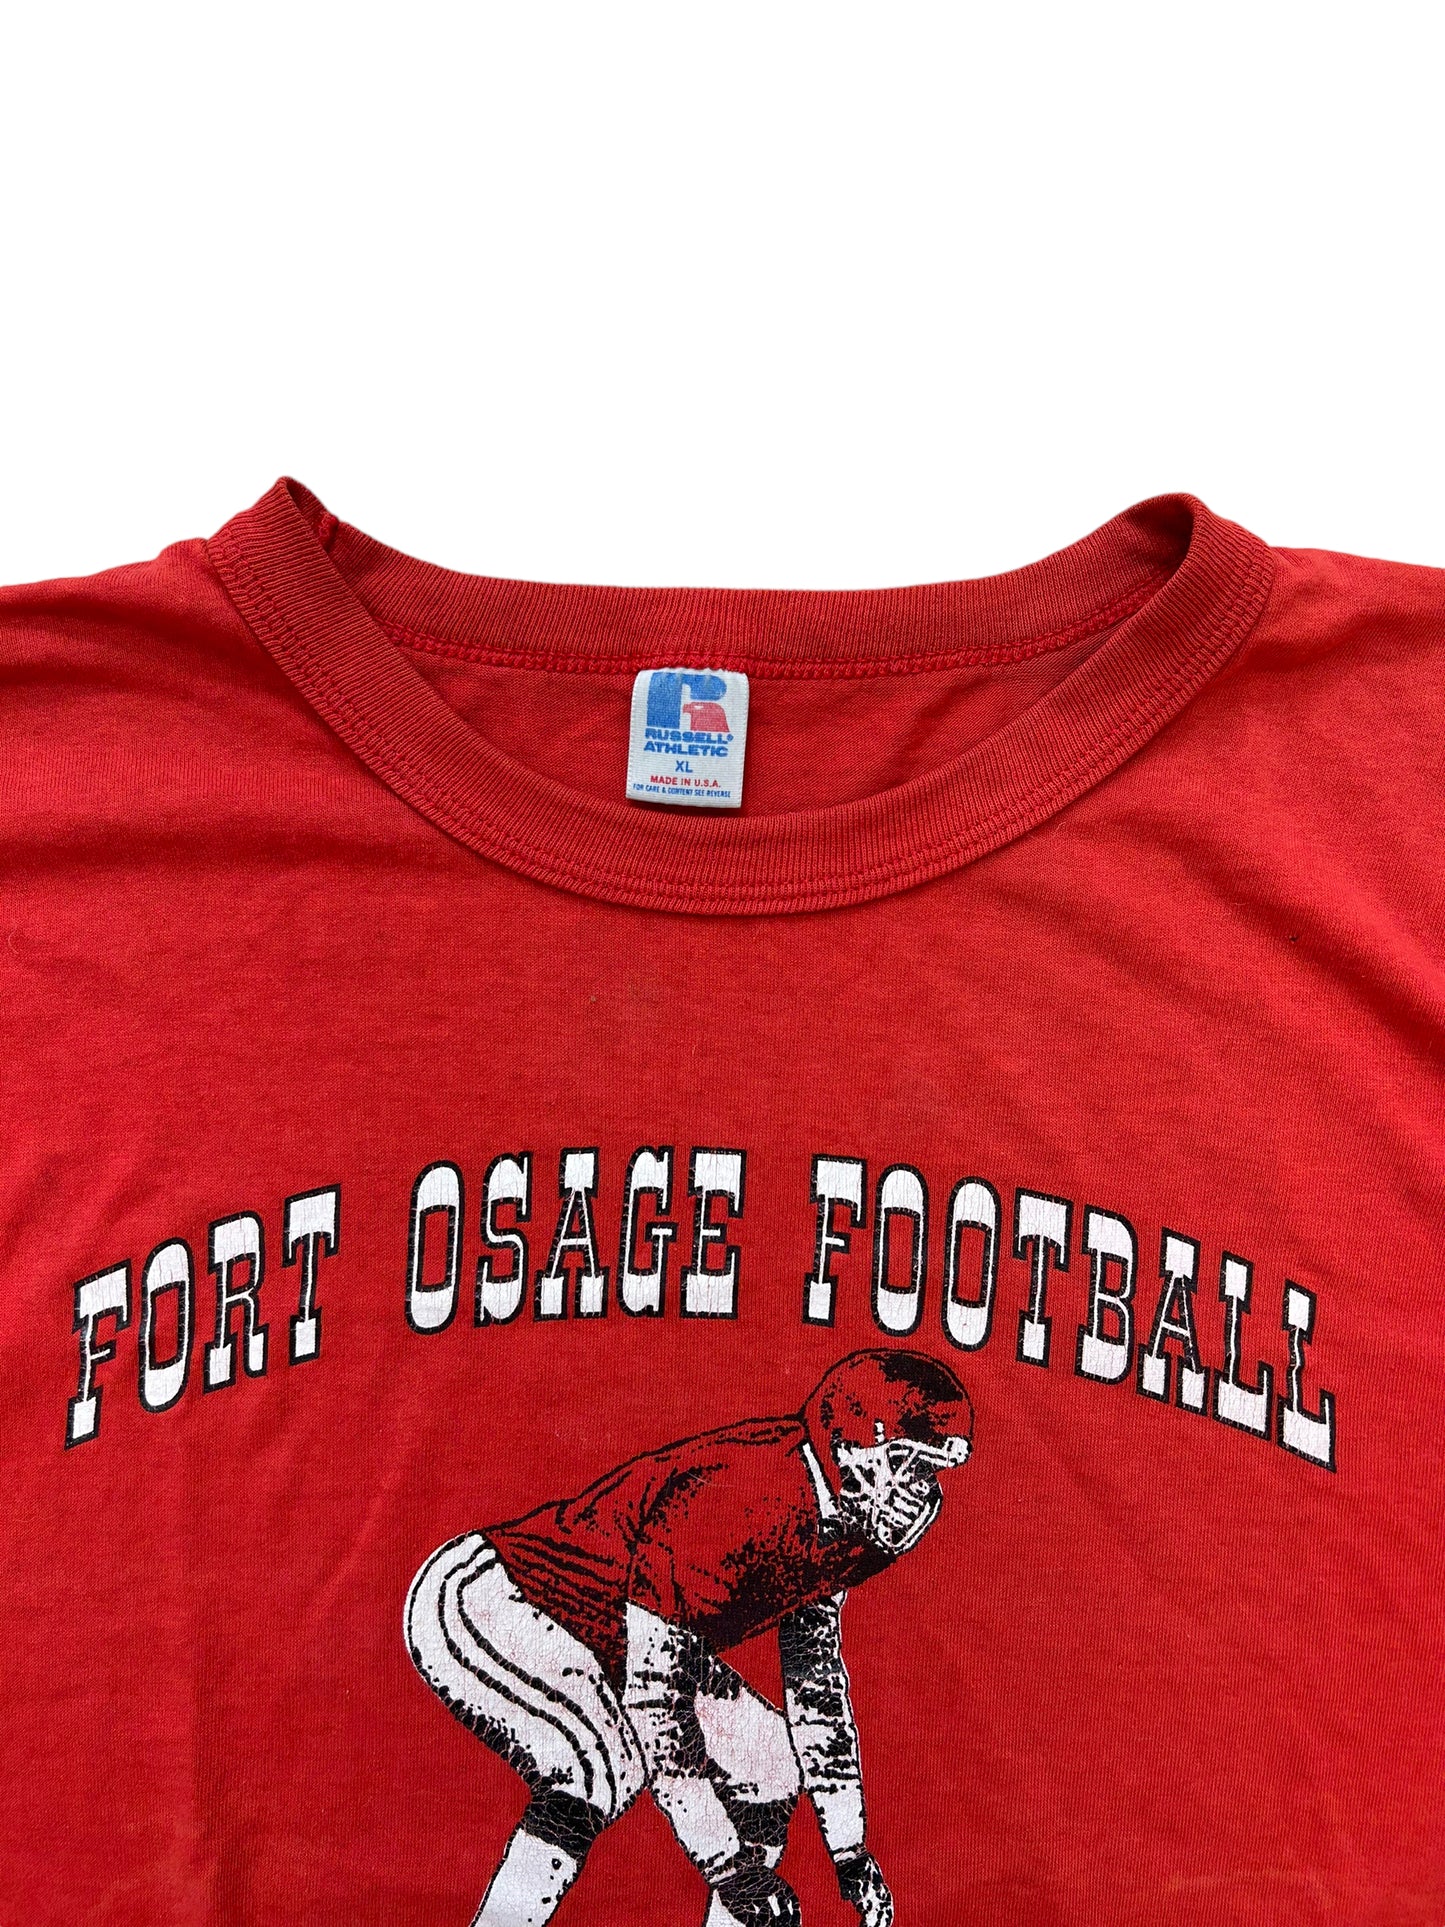 90's Fort Osage Tee